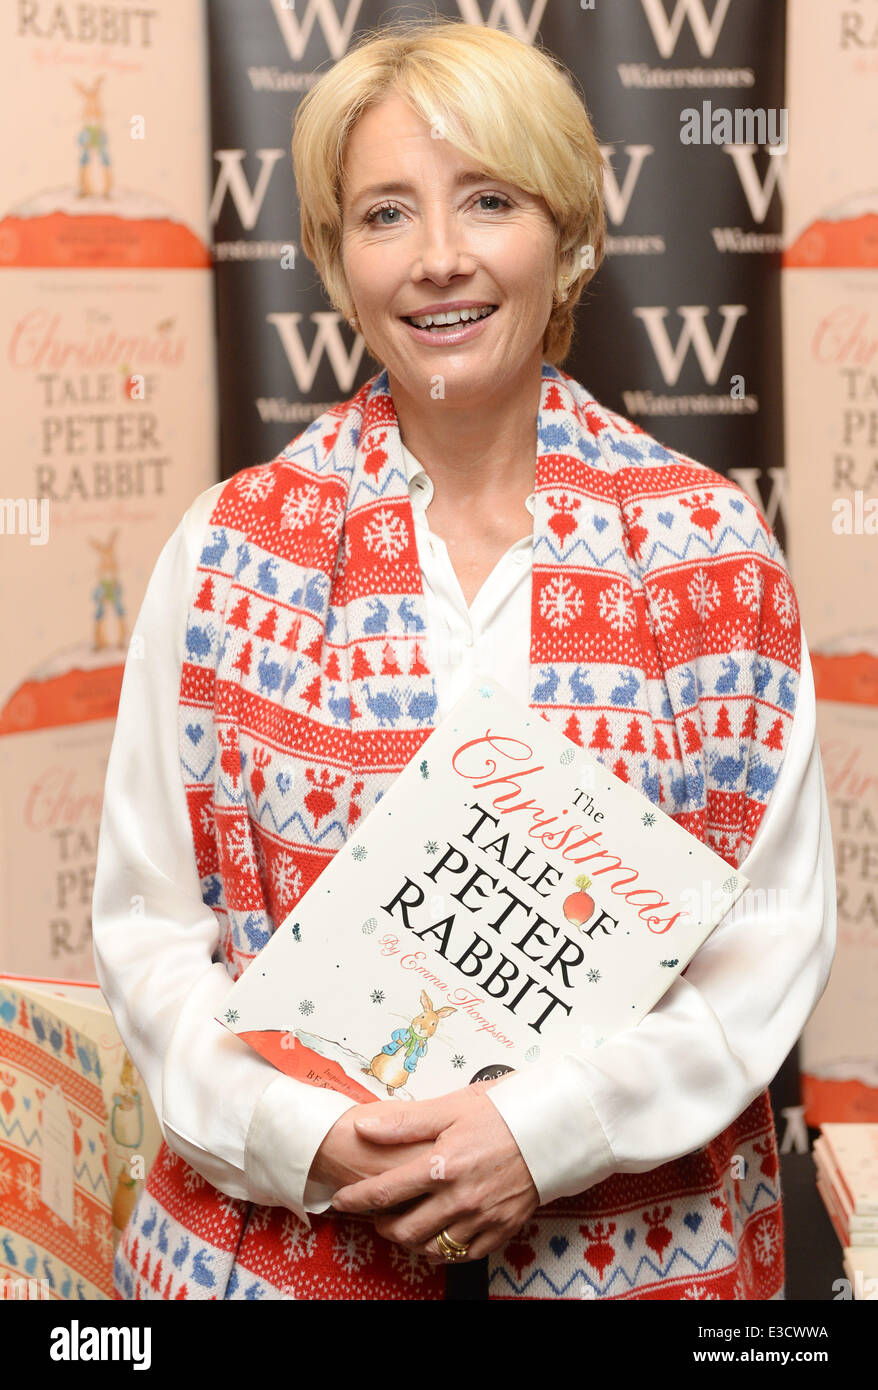 emma-thompson-signs-copies-of-her-book-the-christmas-tale-of-peter-E3CWWA.jpg